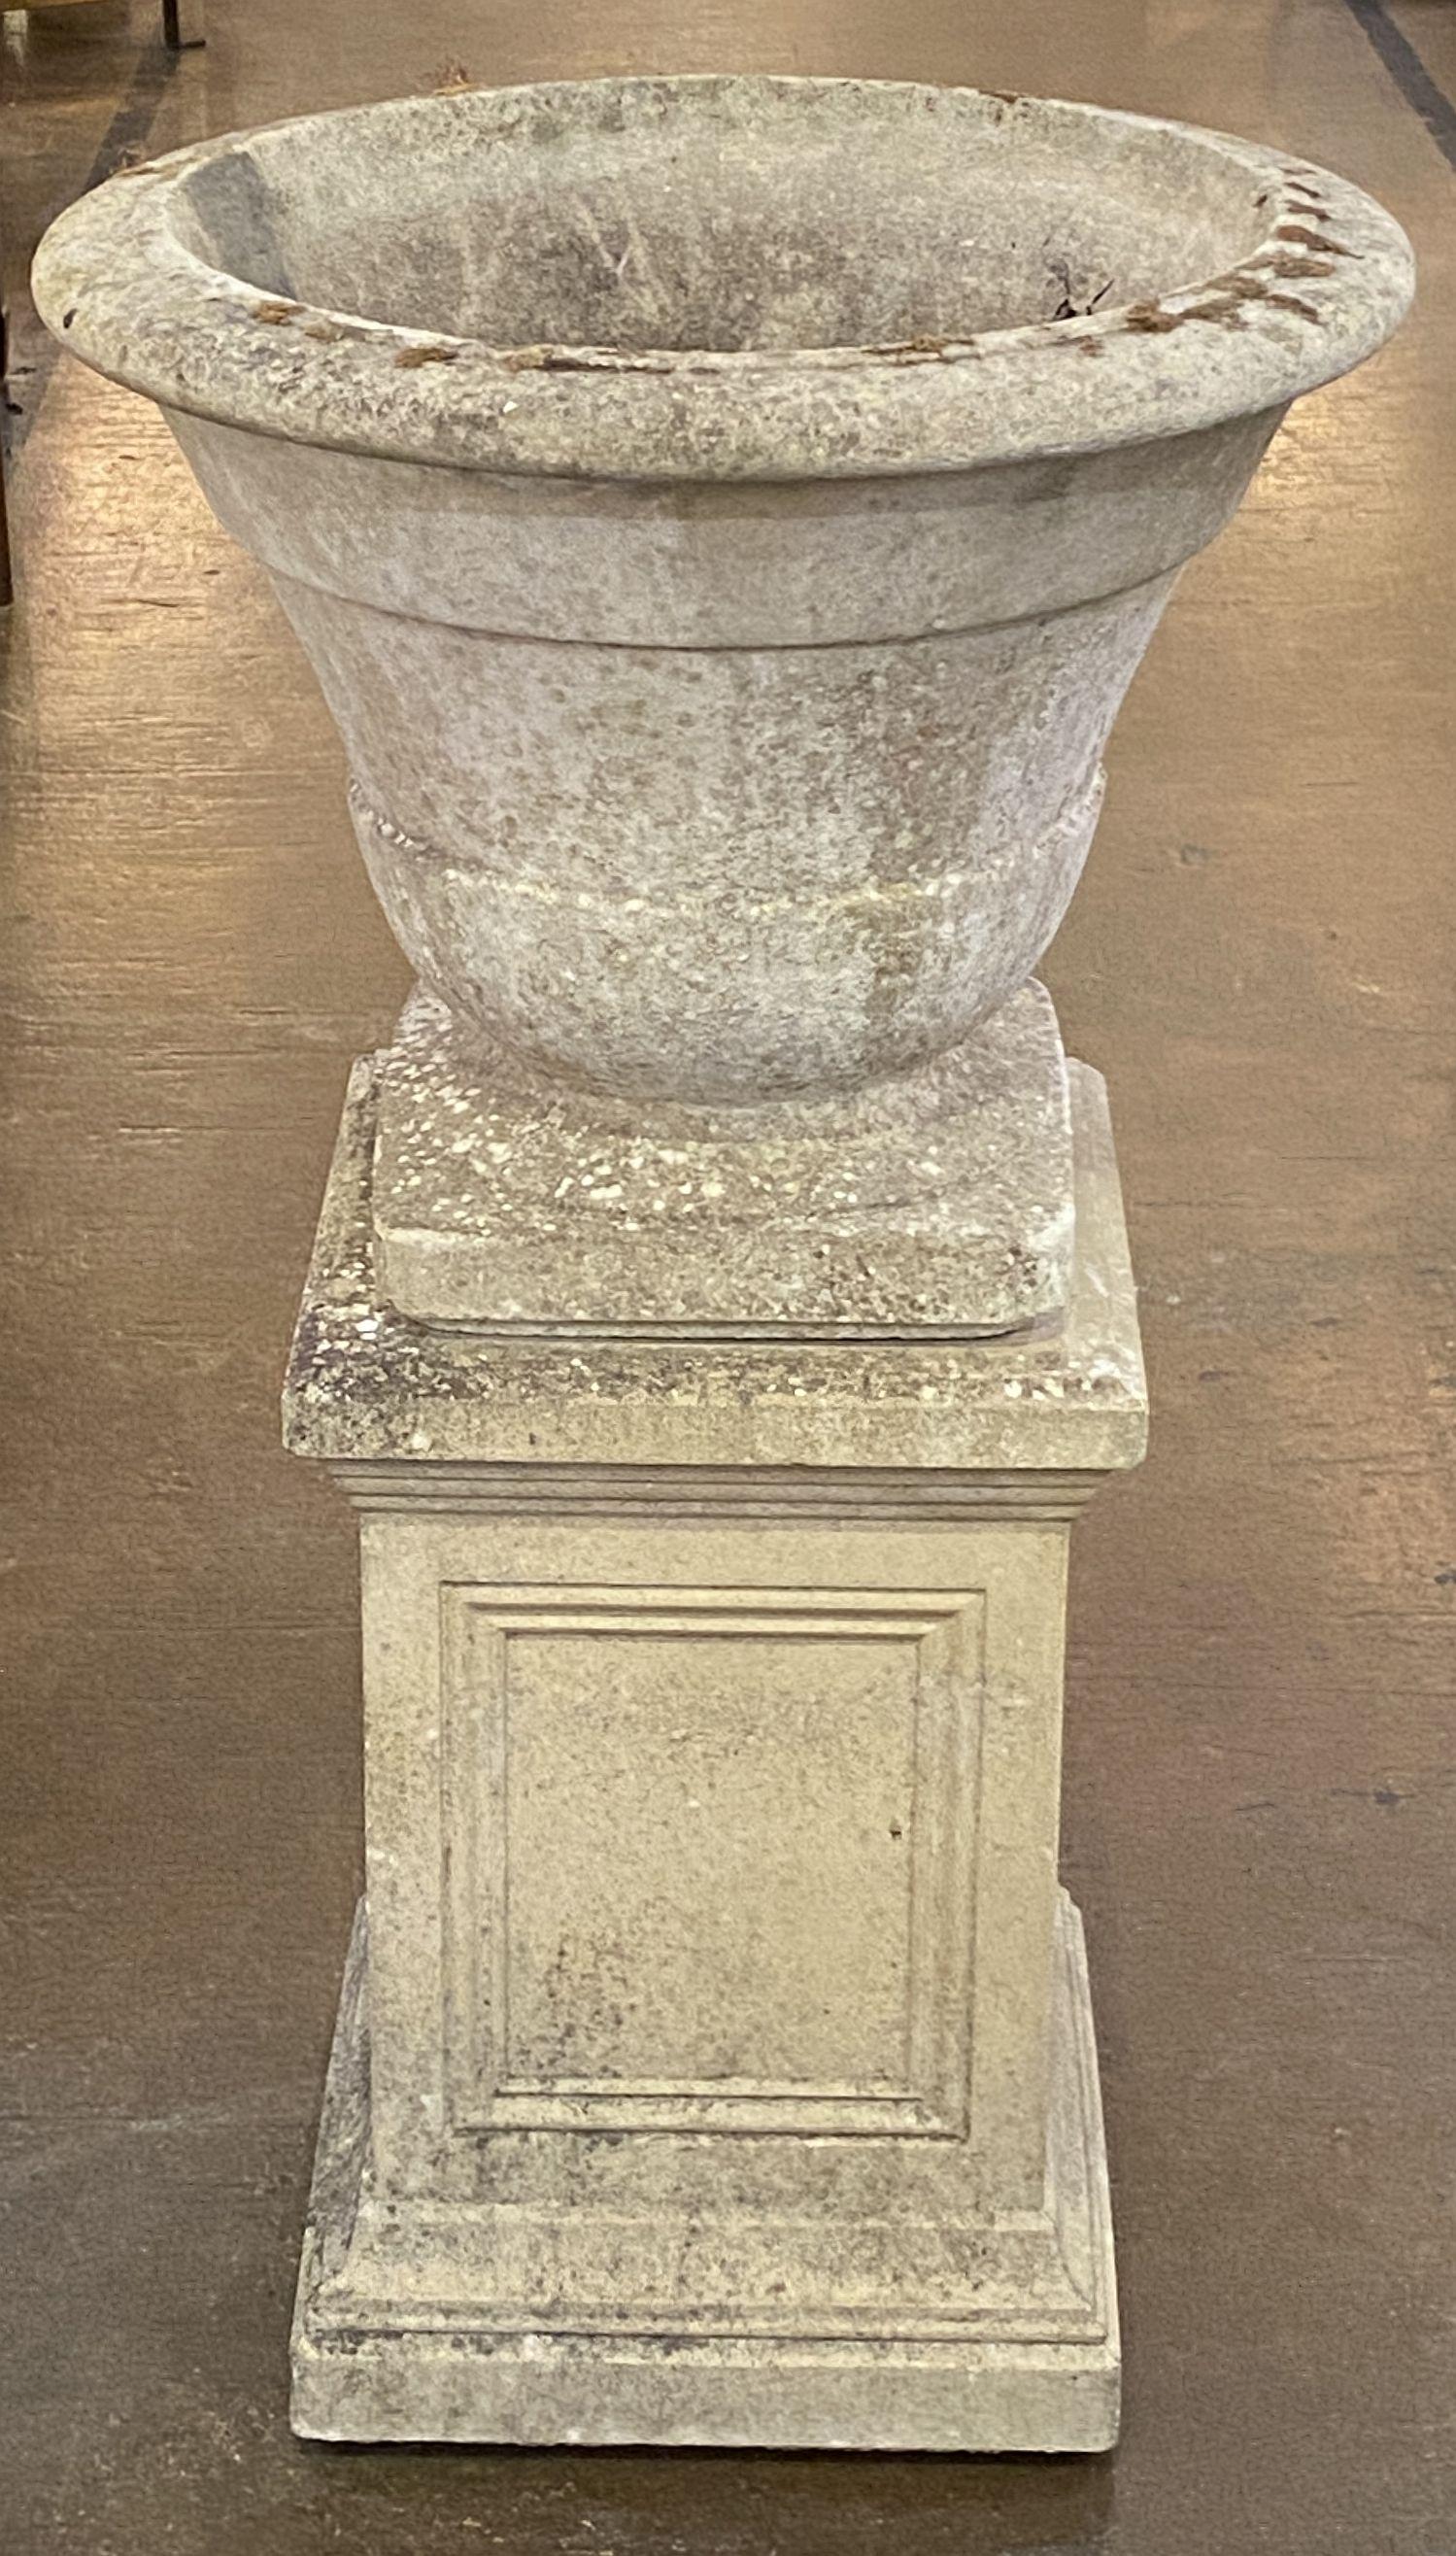 A fine English garden urn (or planter pot) on plinth of composition stone, featuring a round urn with Classically proportioned body on raised square base, set upon a square plinth with a paneled design to the sides.

Perfect for a garden room or